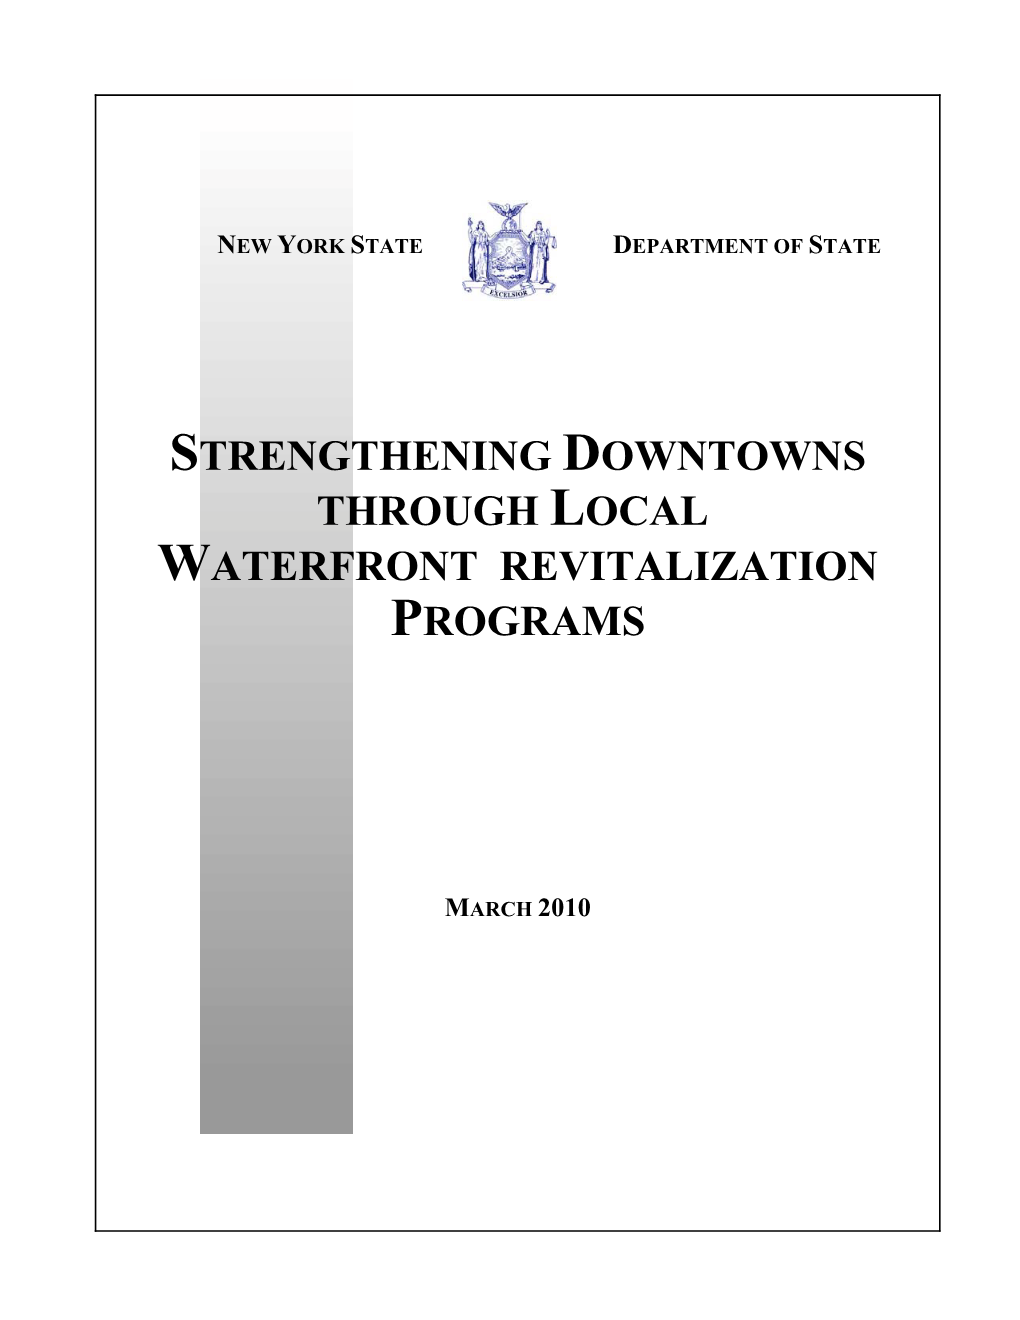 Strengthening Downtowns Through Local Waterfront Revitalization Programs